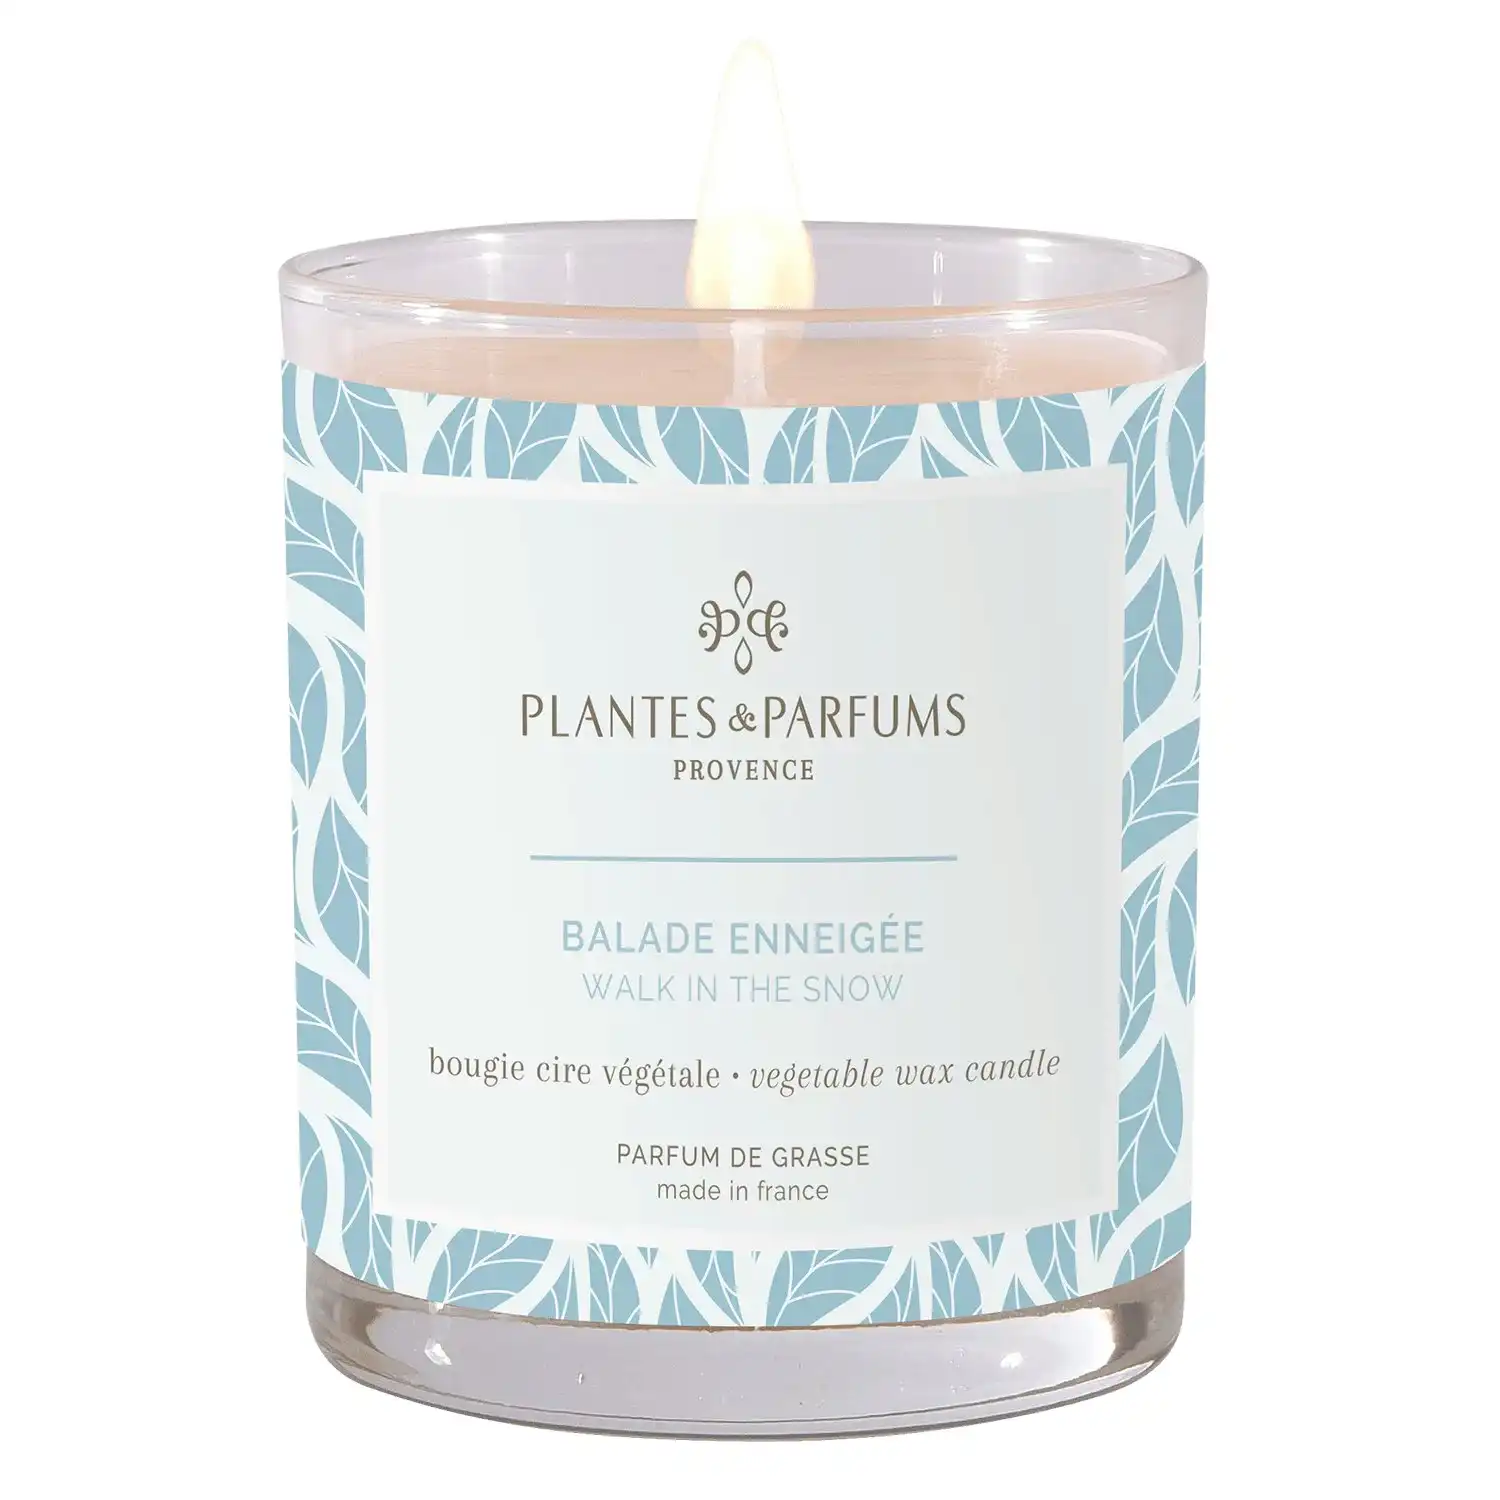 Plantes & Parfums | 75g Handcrafted Perfumed Candle - Walk in the Snow